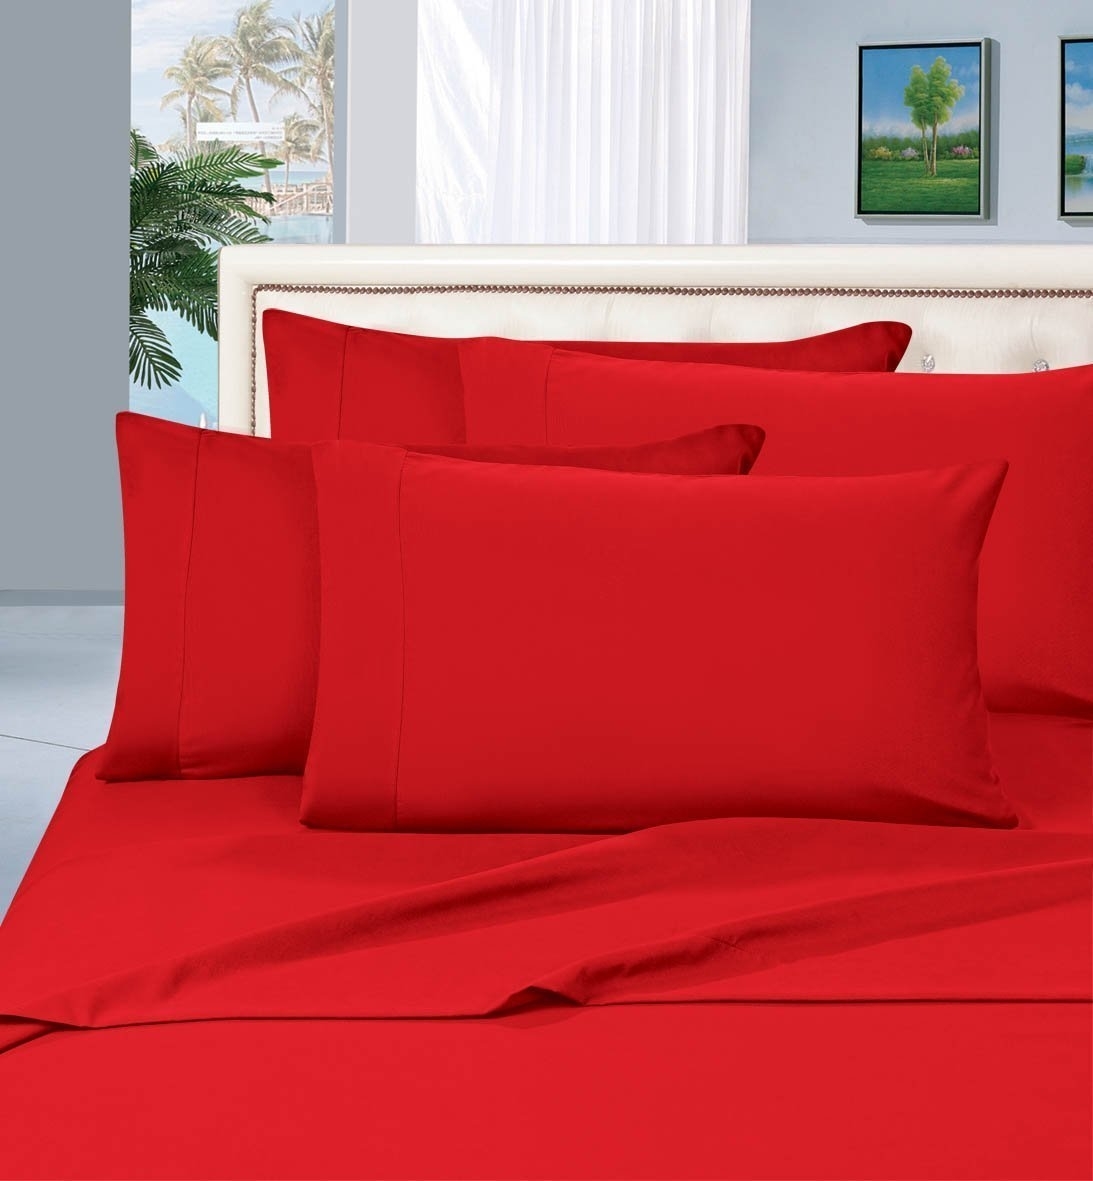 Elegant Comfort 1500 Series Wrinkle Resistant Egyptian Quality Hypoallergenic Ultra Soft Luxury 4-piece Bed Sheet Set, Queen, Red